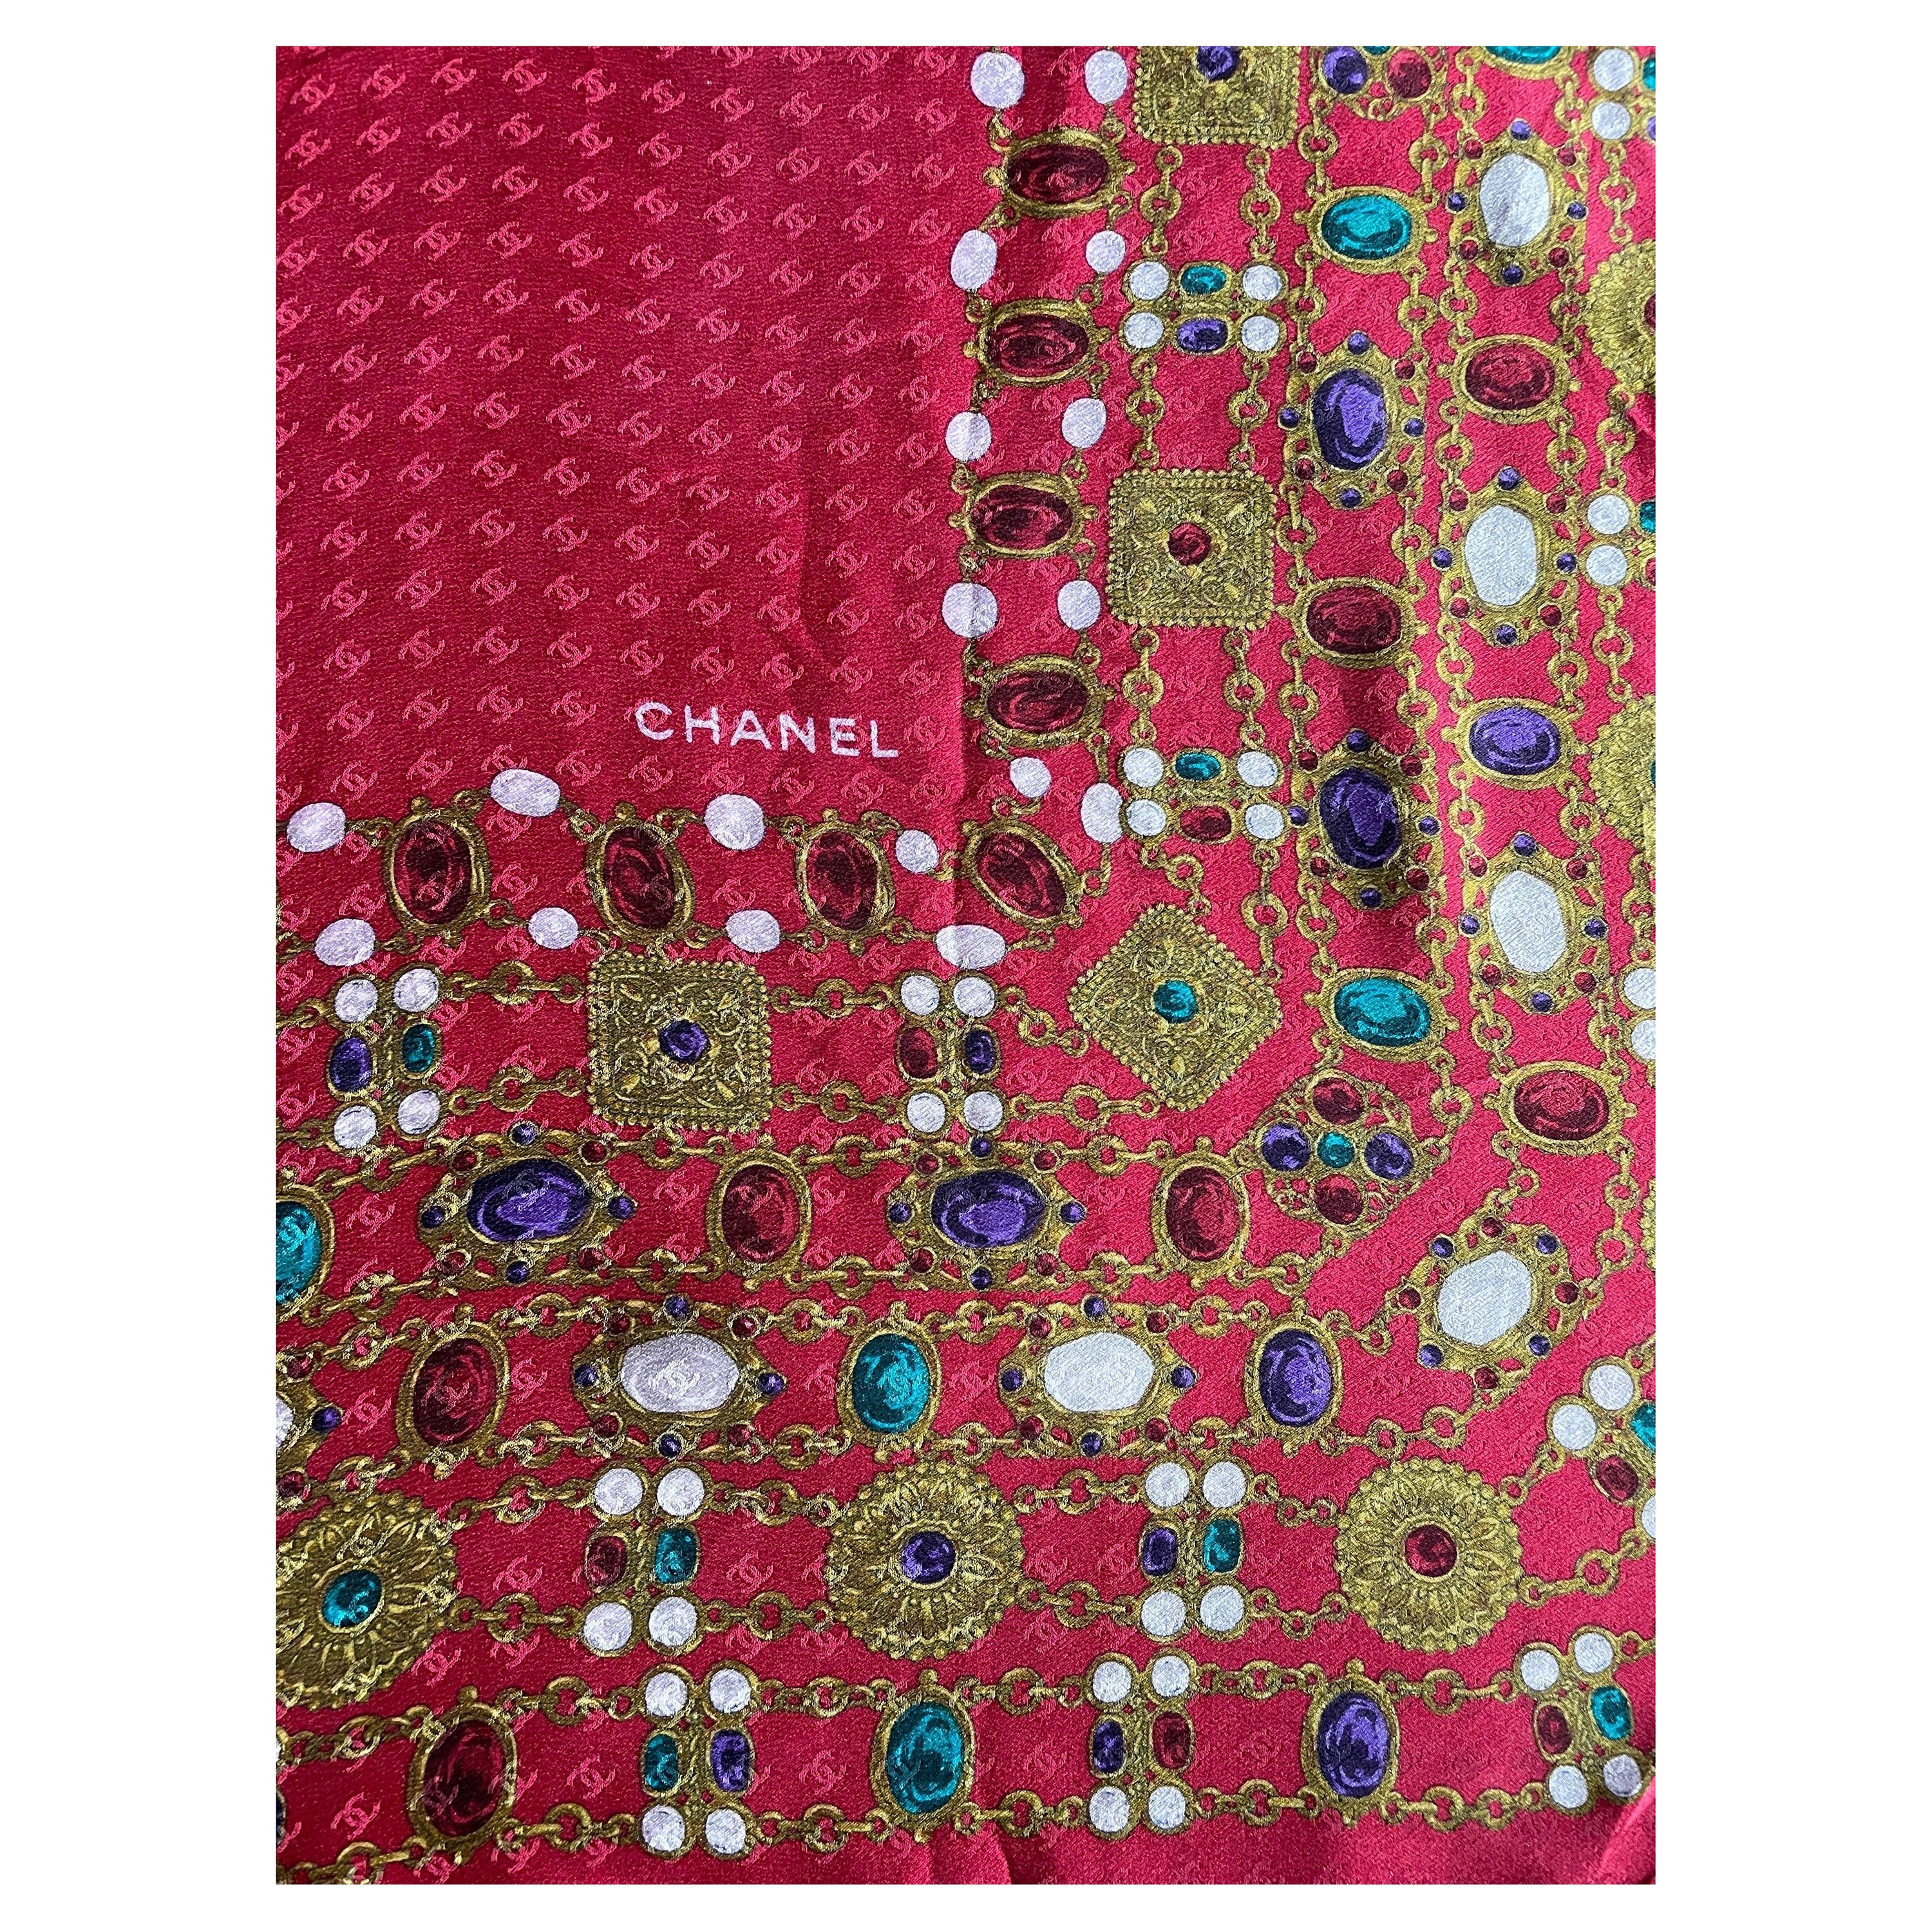 CHANEL CC logo authentic vintage silk scarf pearl gripoix gold chains red jewels For Sale